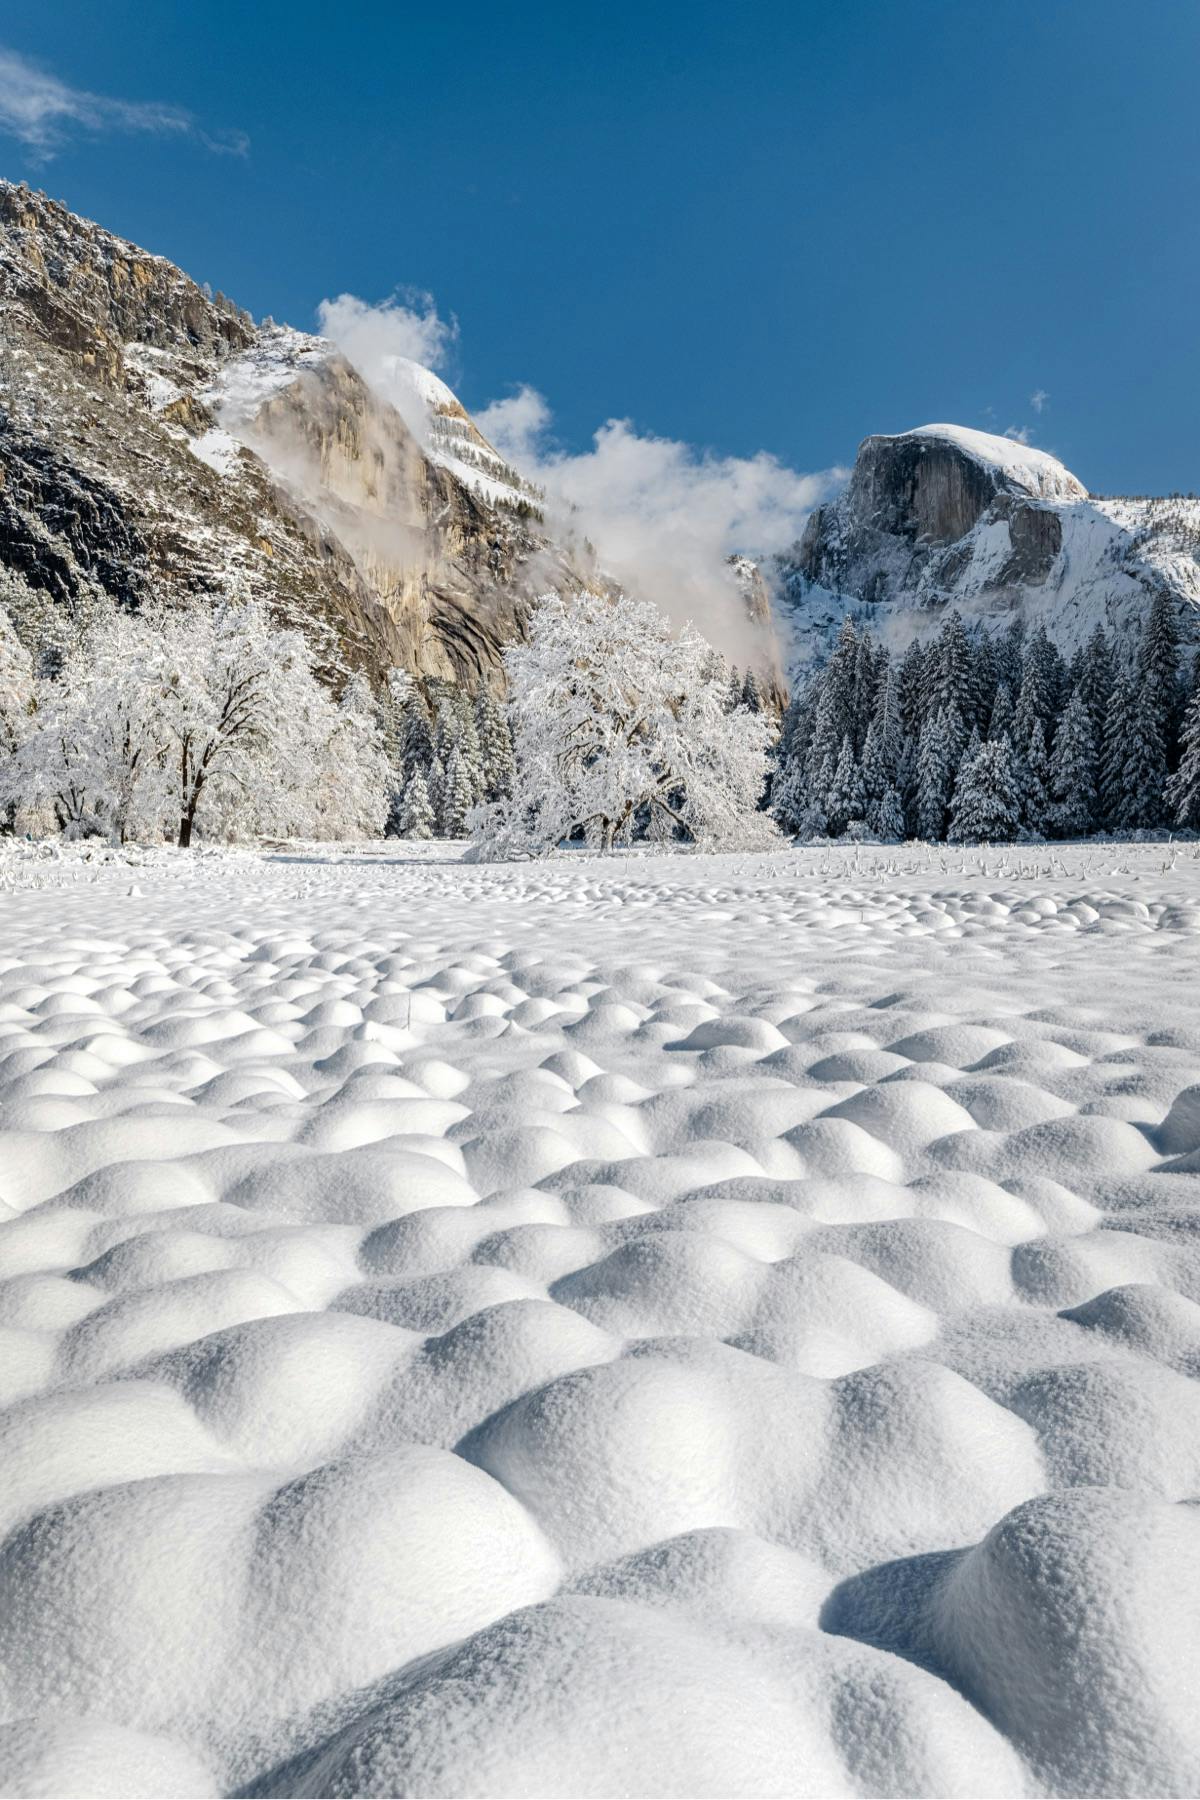 Small mounds of snow cover a wintery landscape with mountains in the background of Yosemite National Park